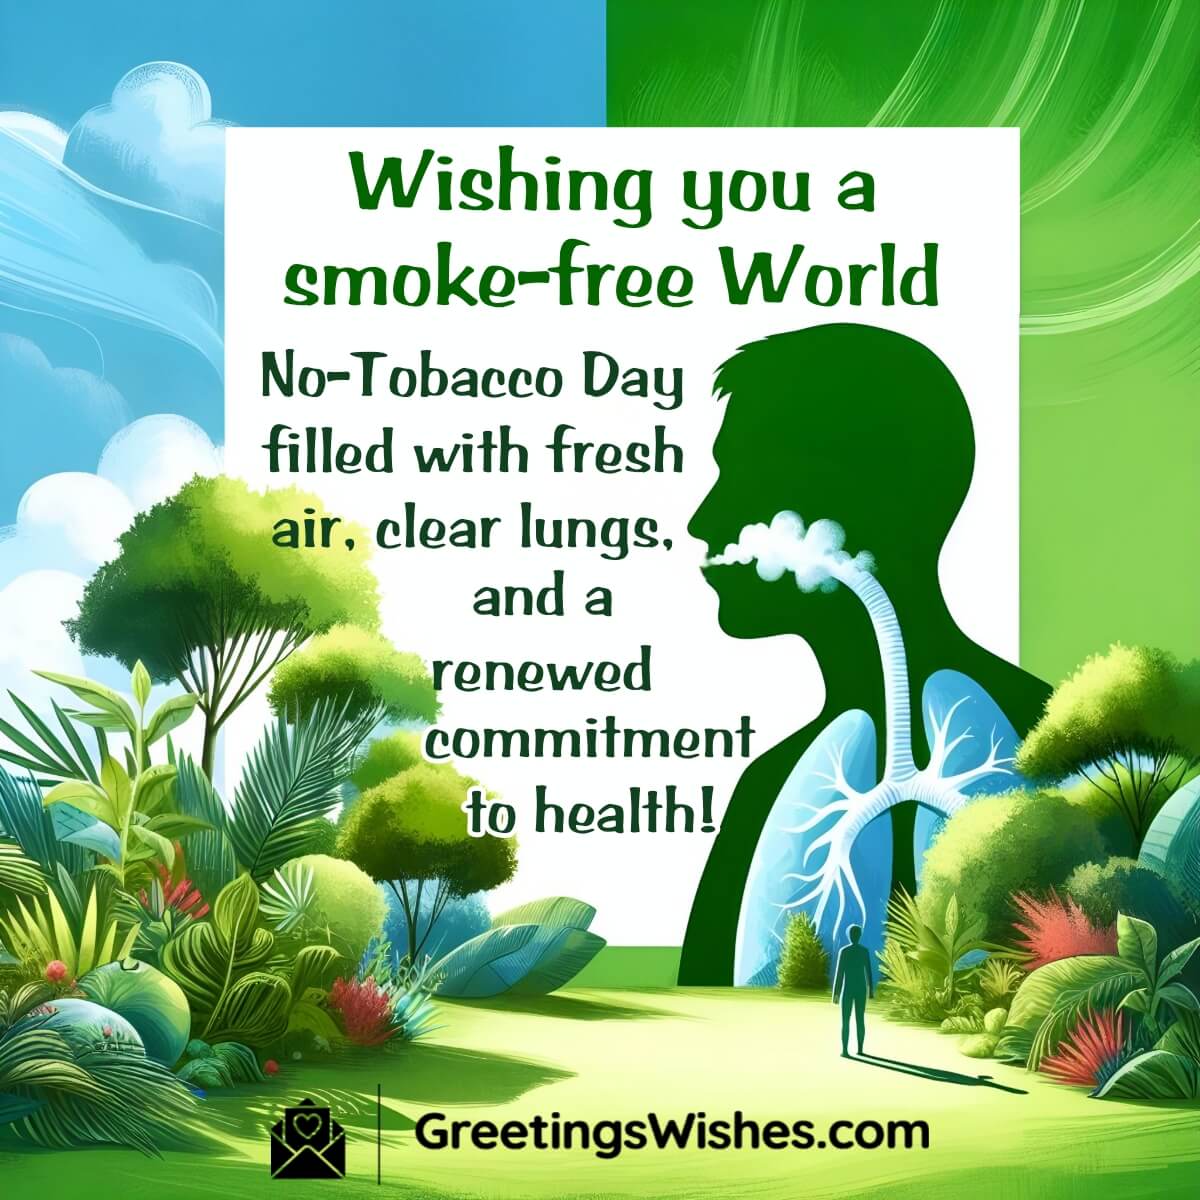 World No-Tobacco Day Wishes (31st May)